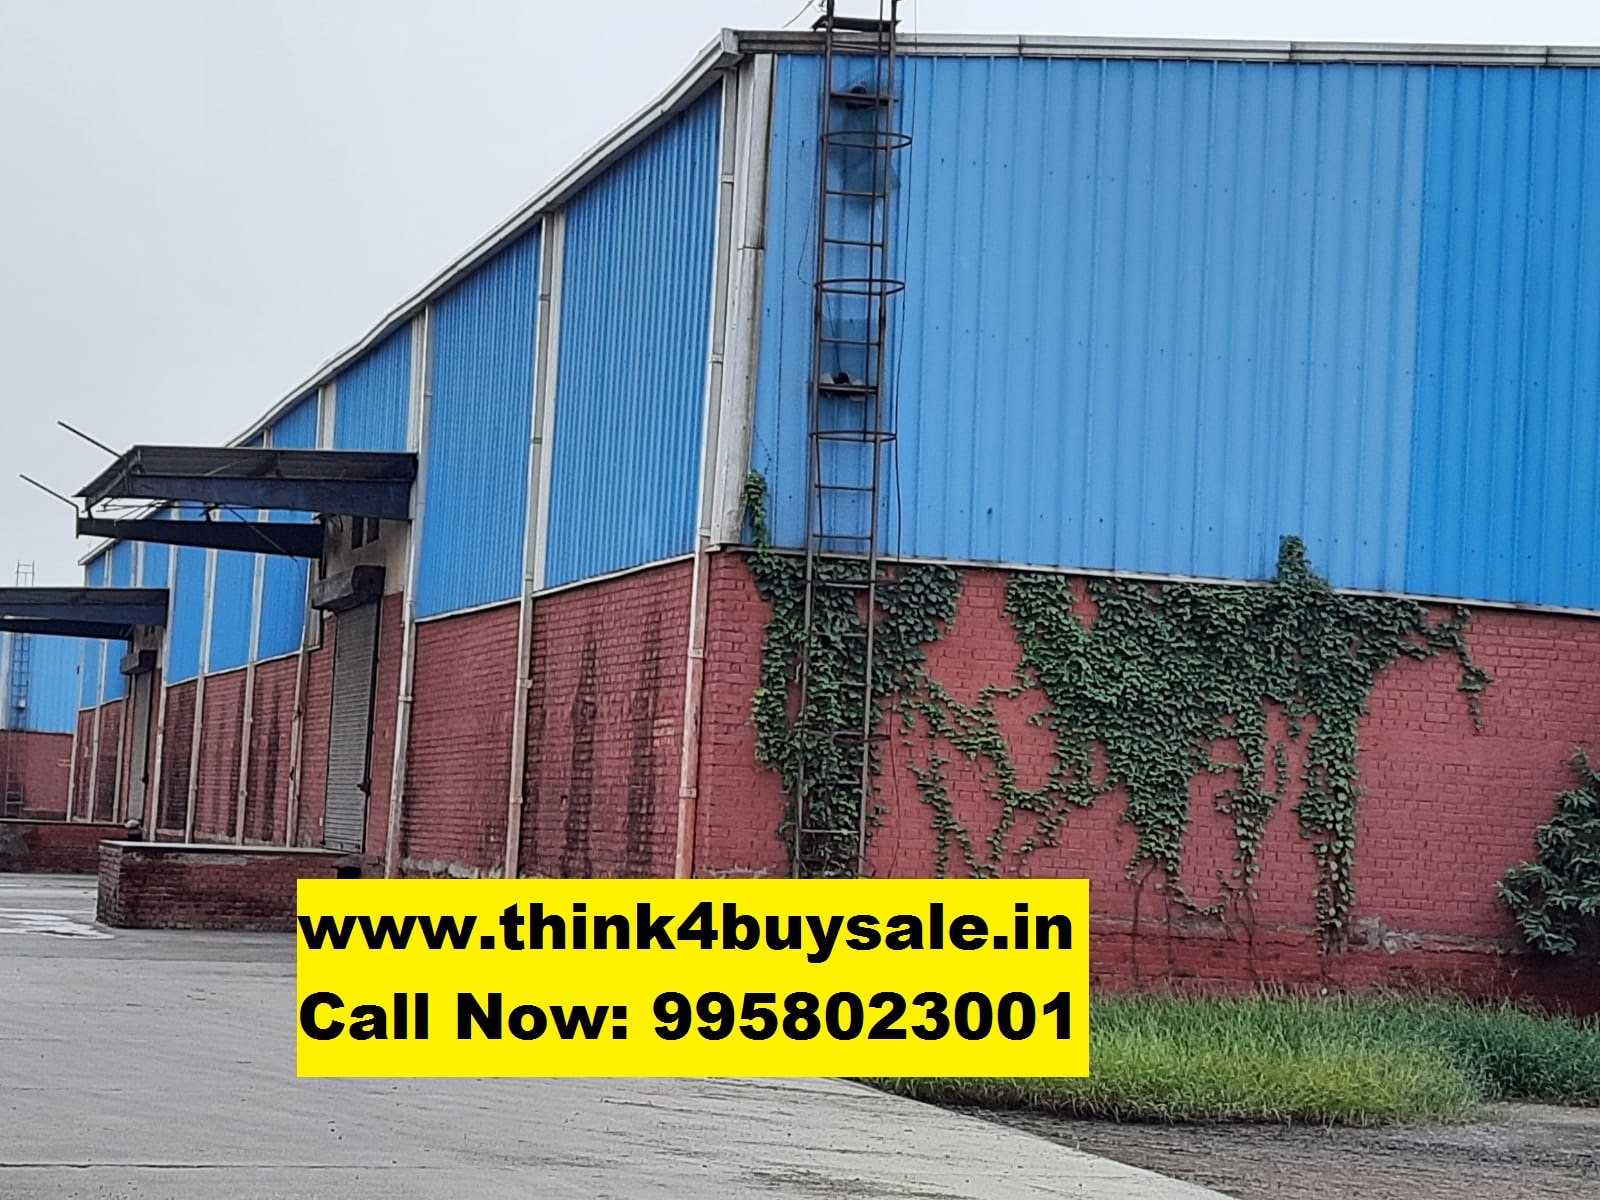 Warehouse for rent in Ghaziabad